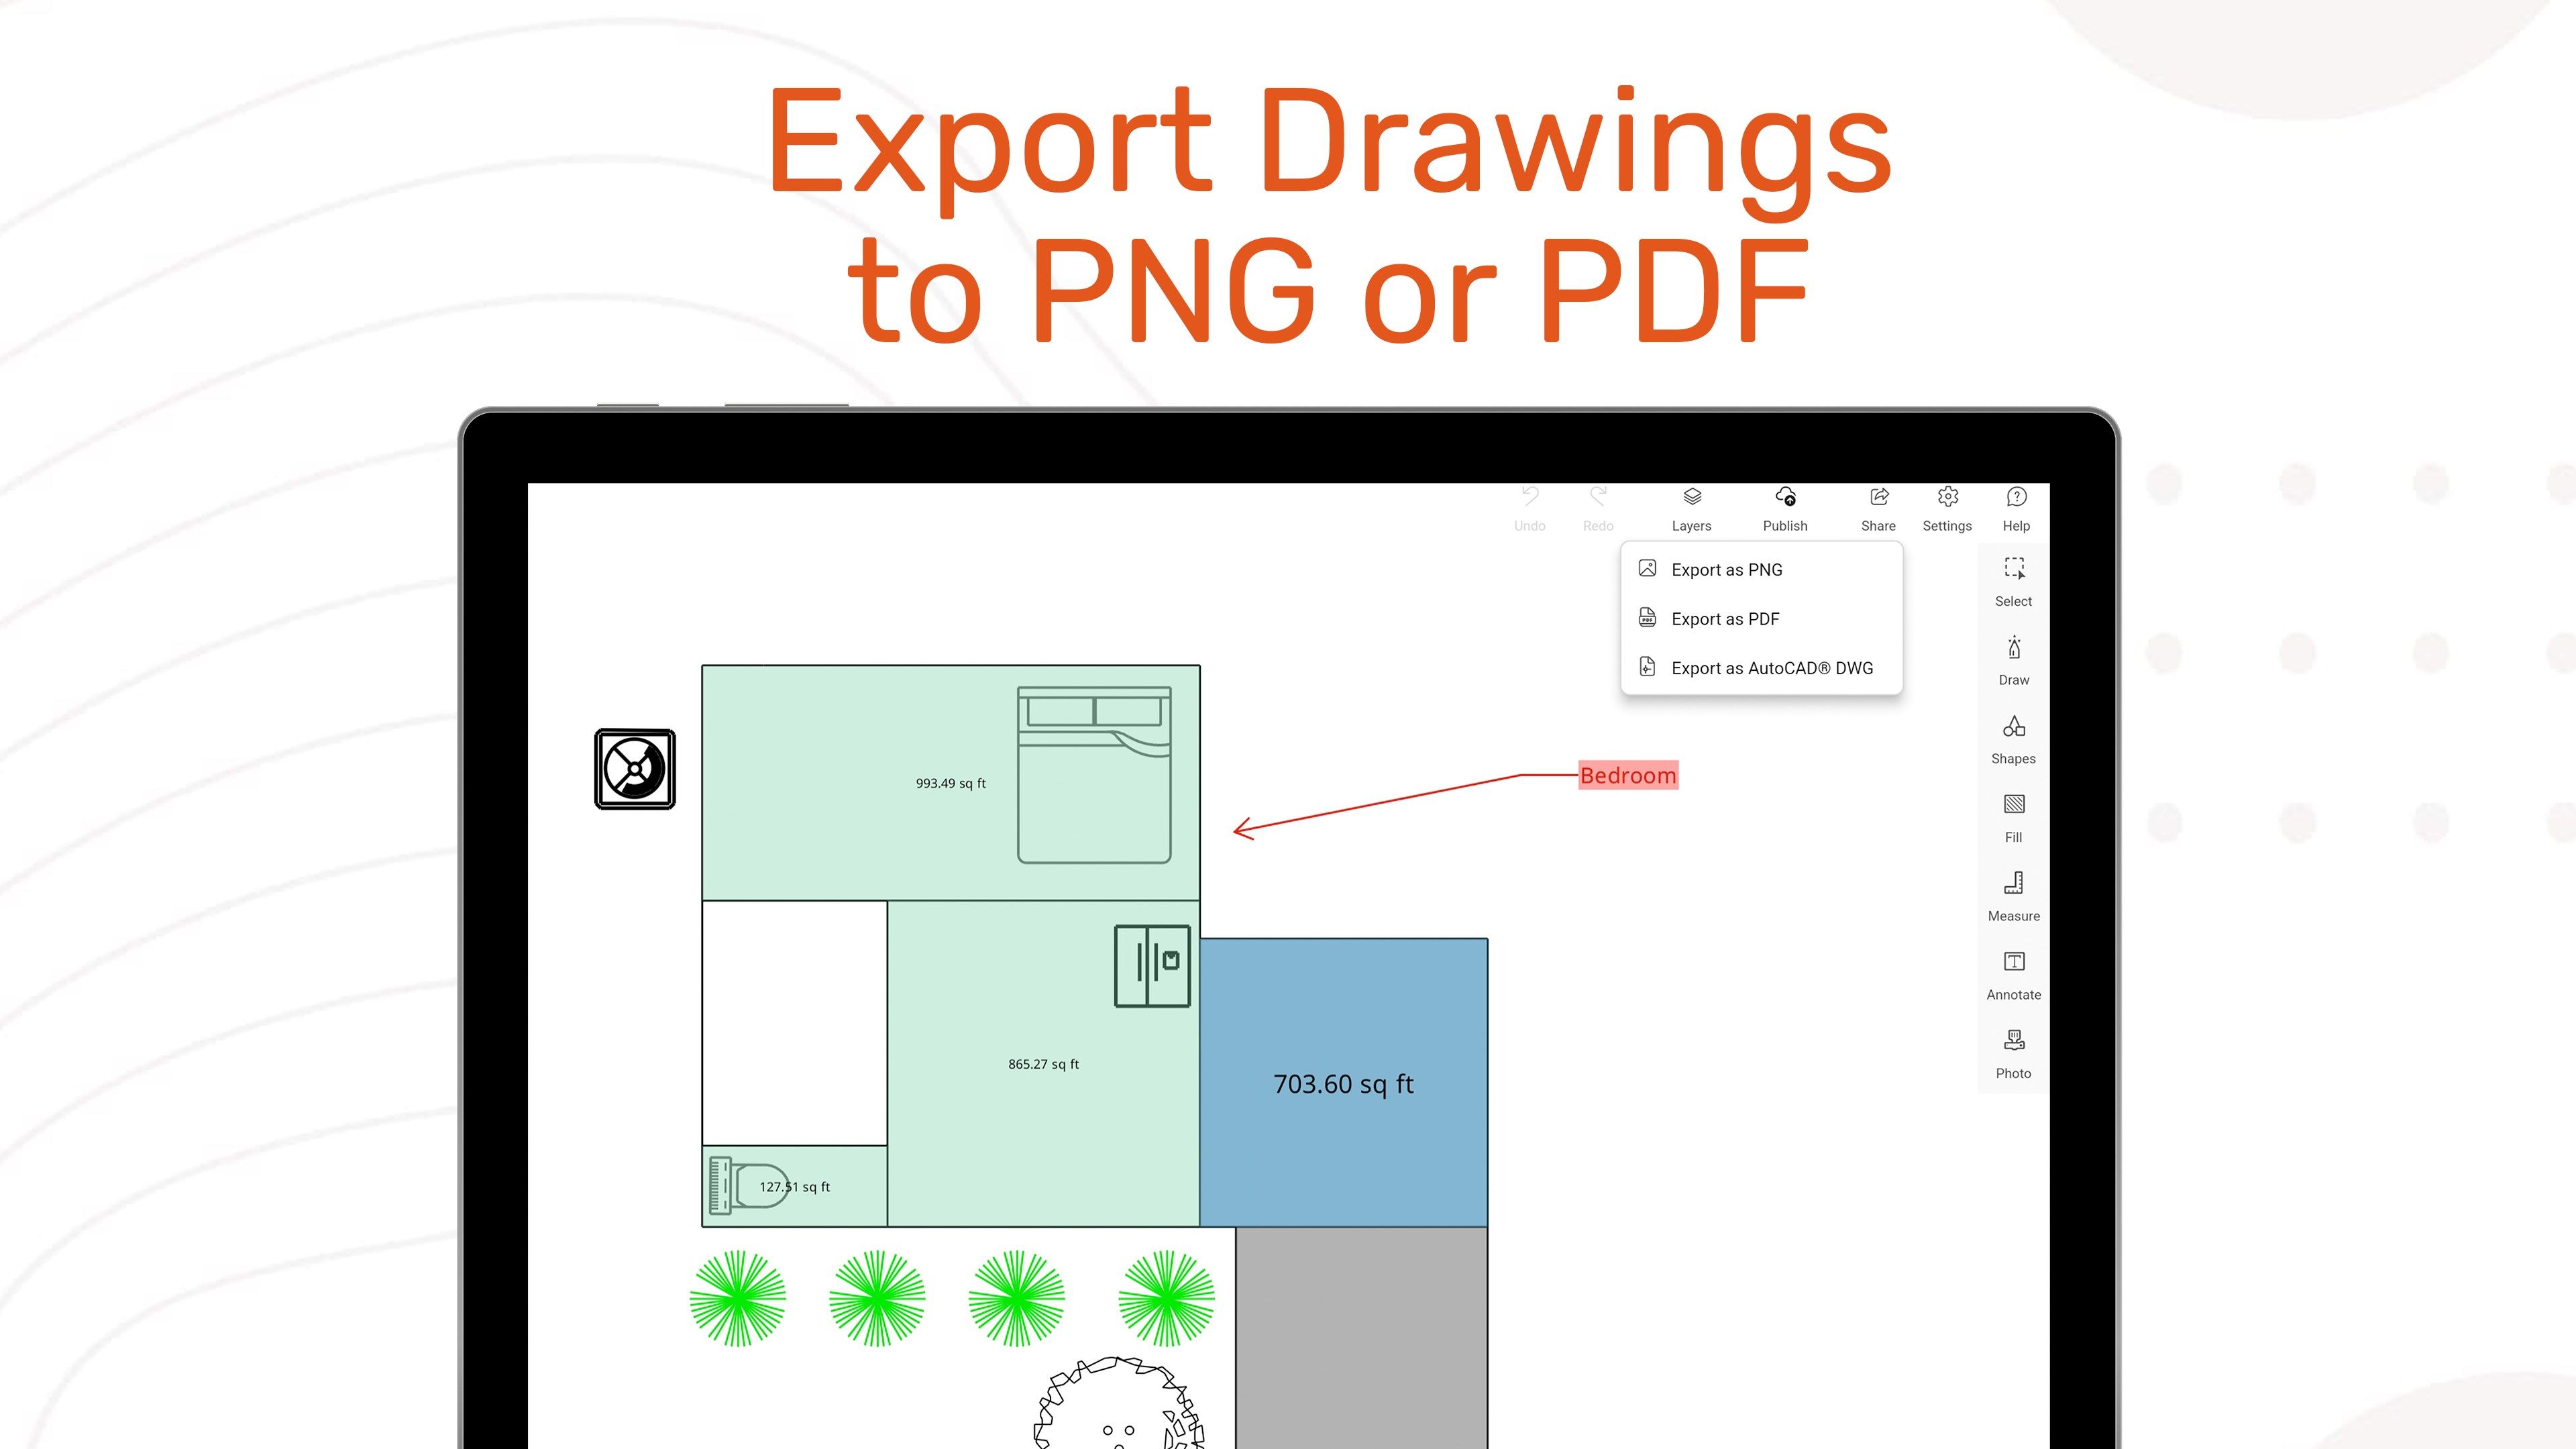 Export Drawings to PNG or PDF